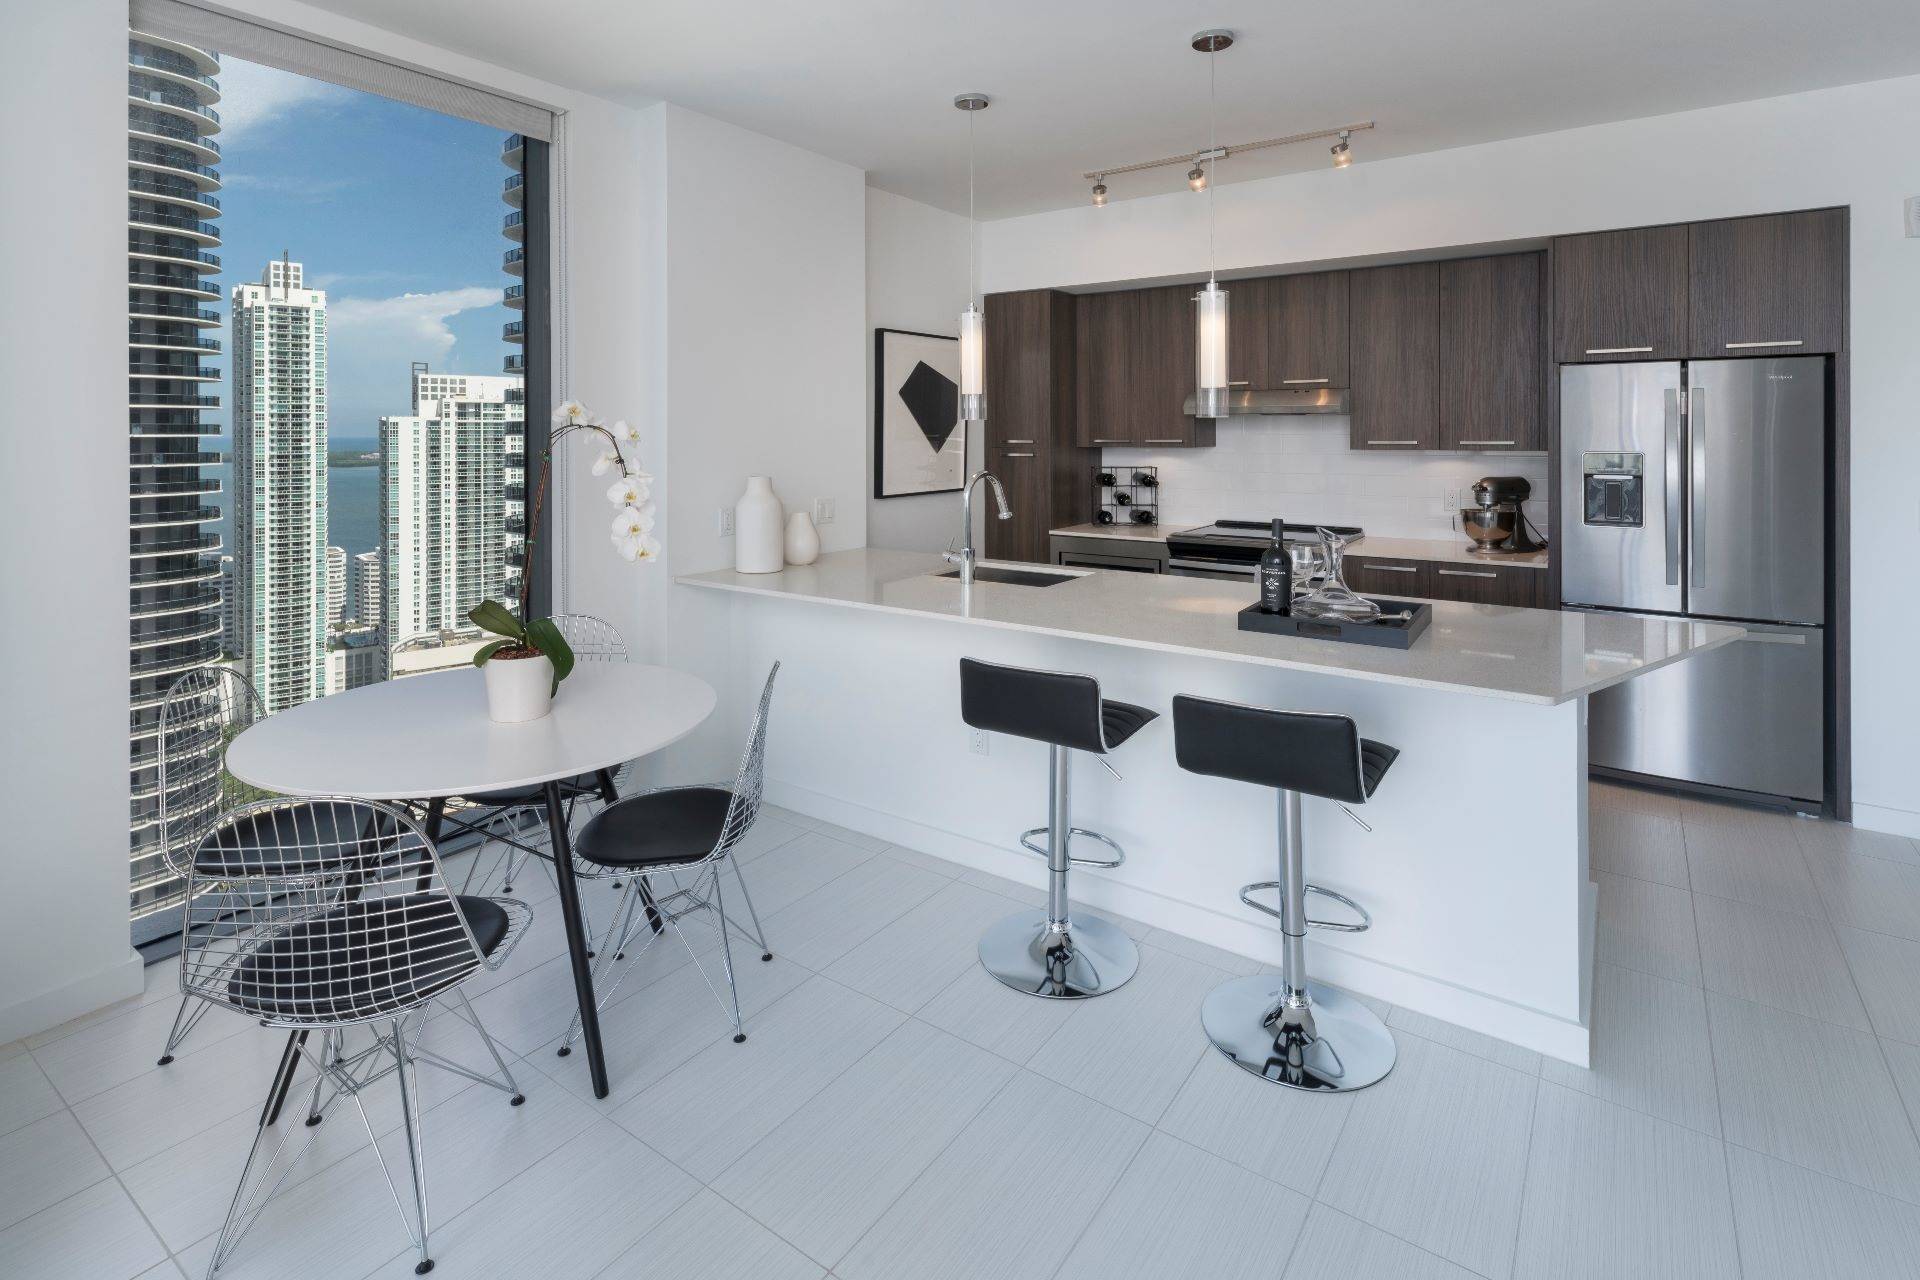 2 MONTHS FREE| Amazing Brickell| Full Package 2br/2ba| 993 SF